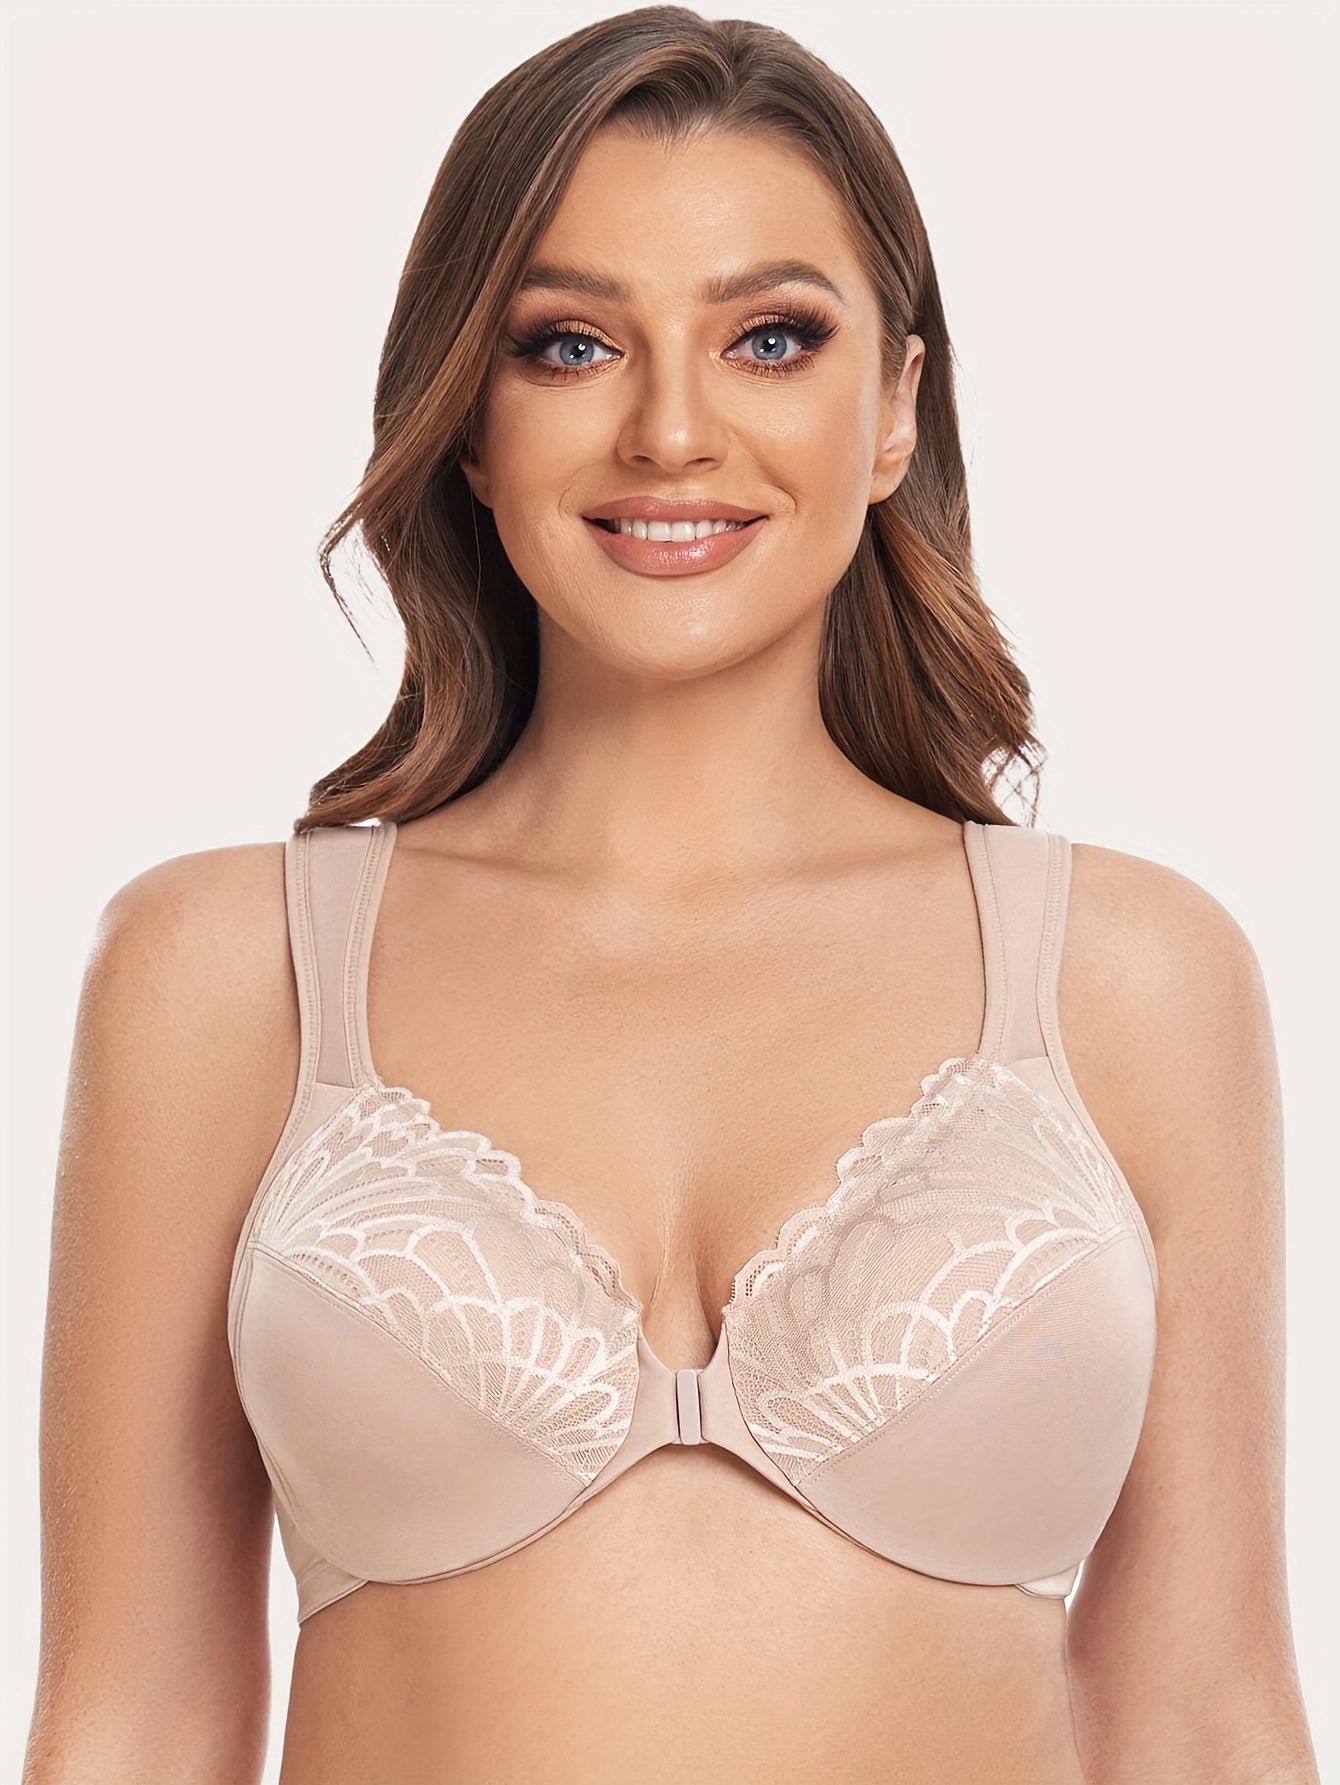 Everyday Bras for Women Plus Size Lace-Trim Bra Full-Coverage Push